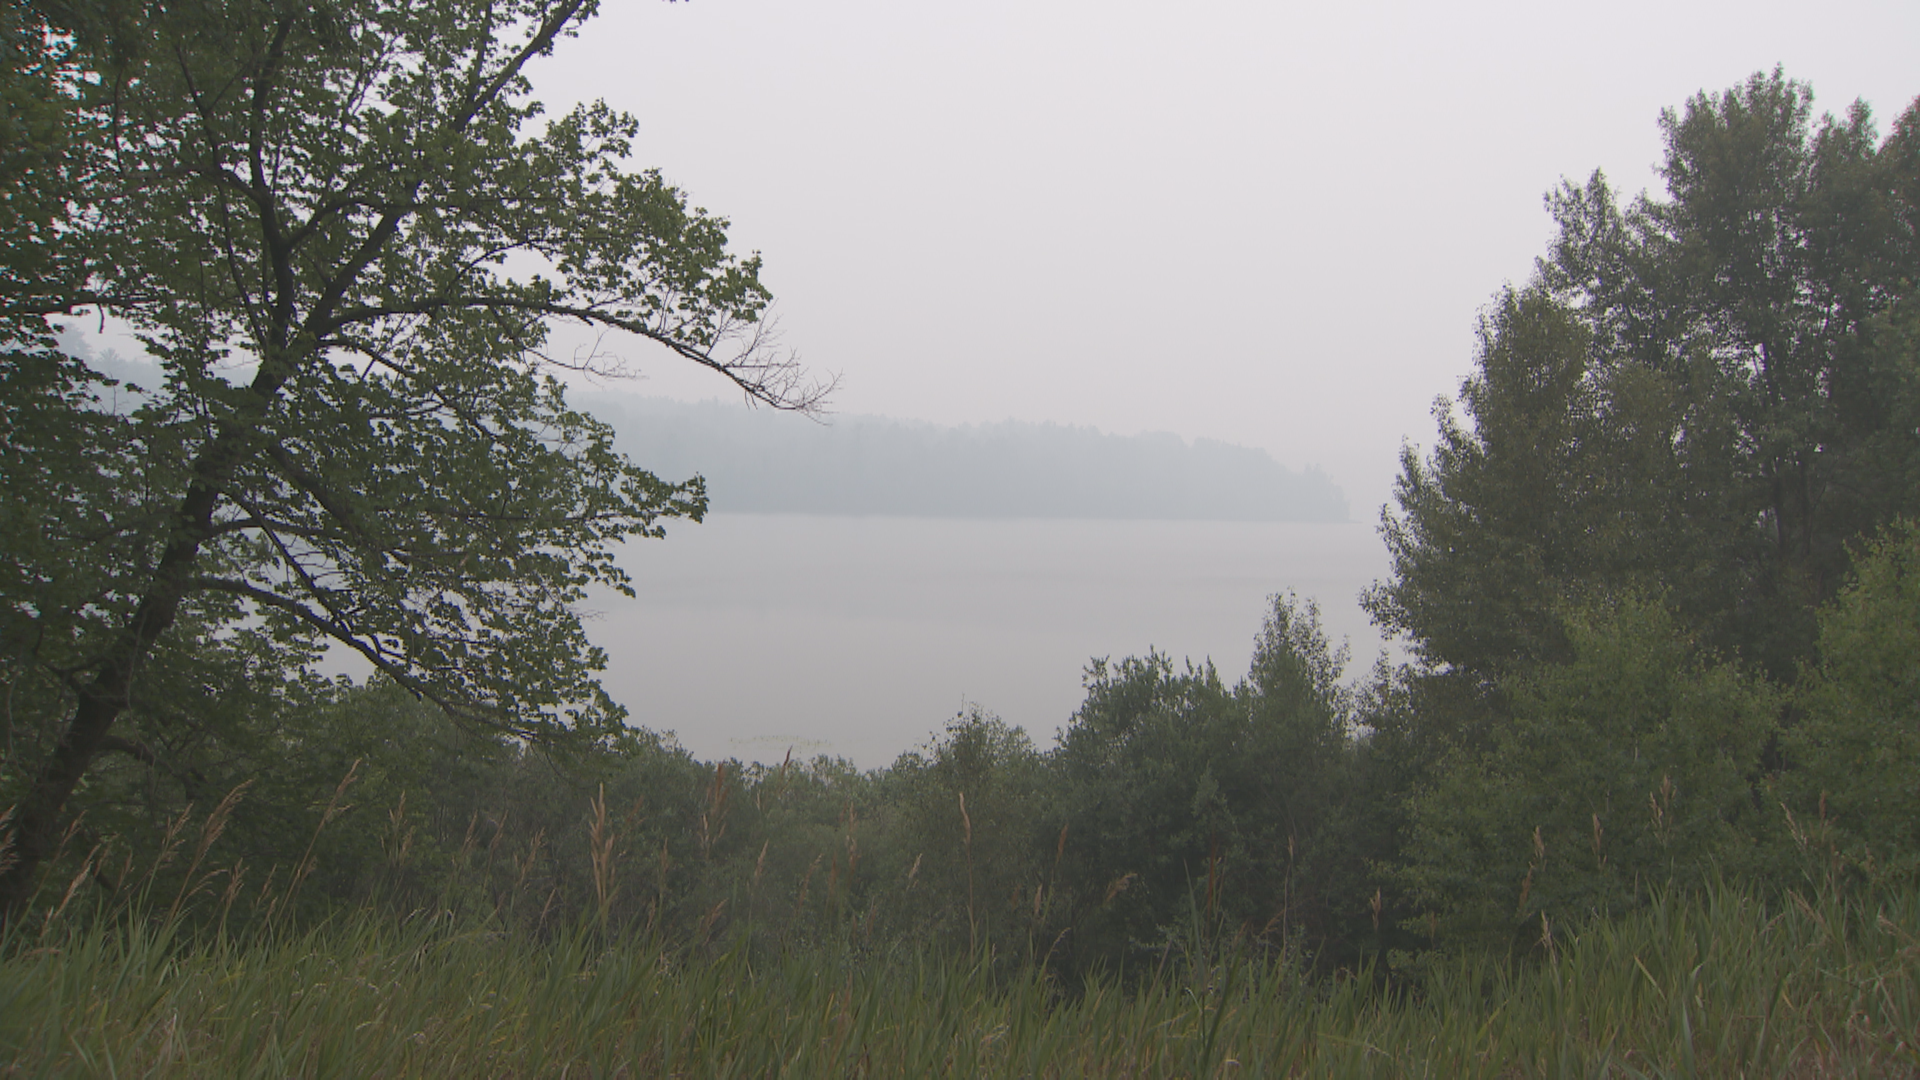 It's one of the newest state parks in Minnesota and was built on the site of a former resort.